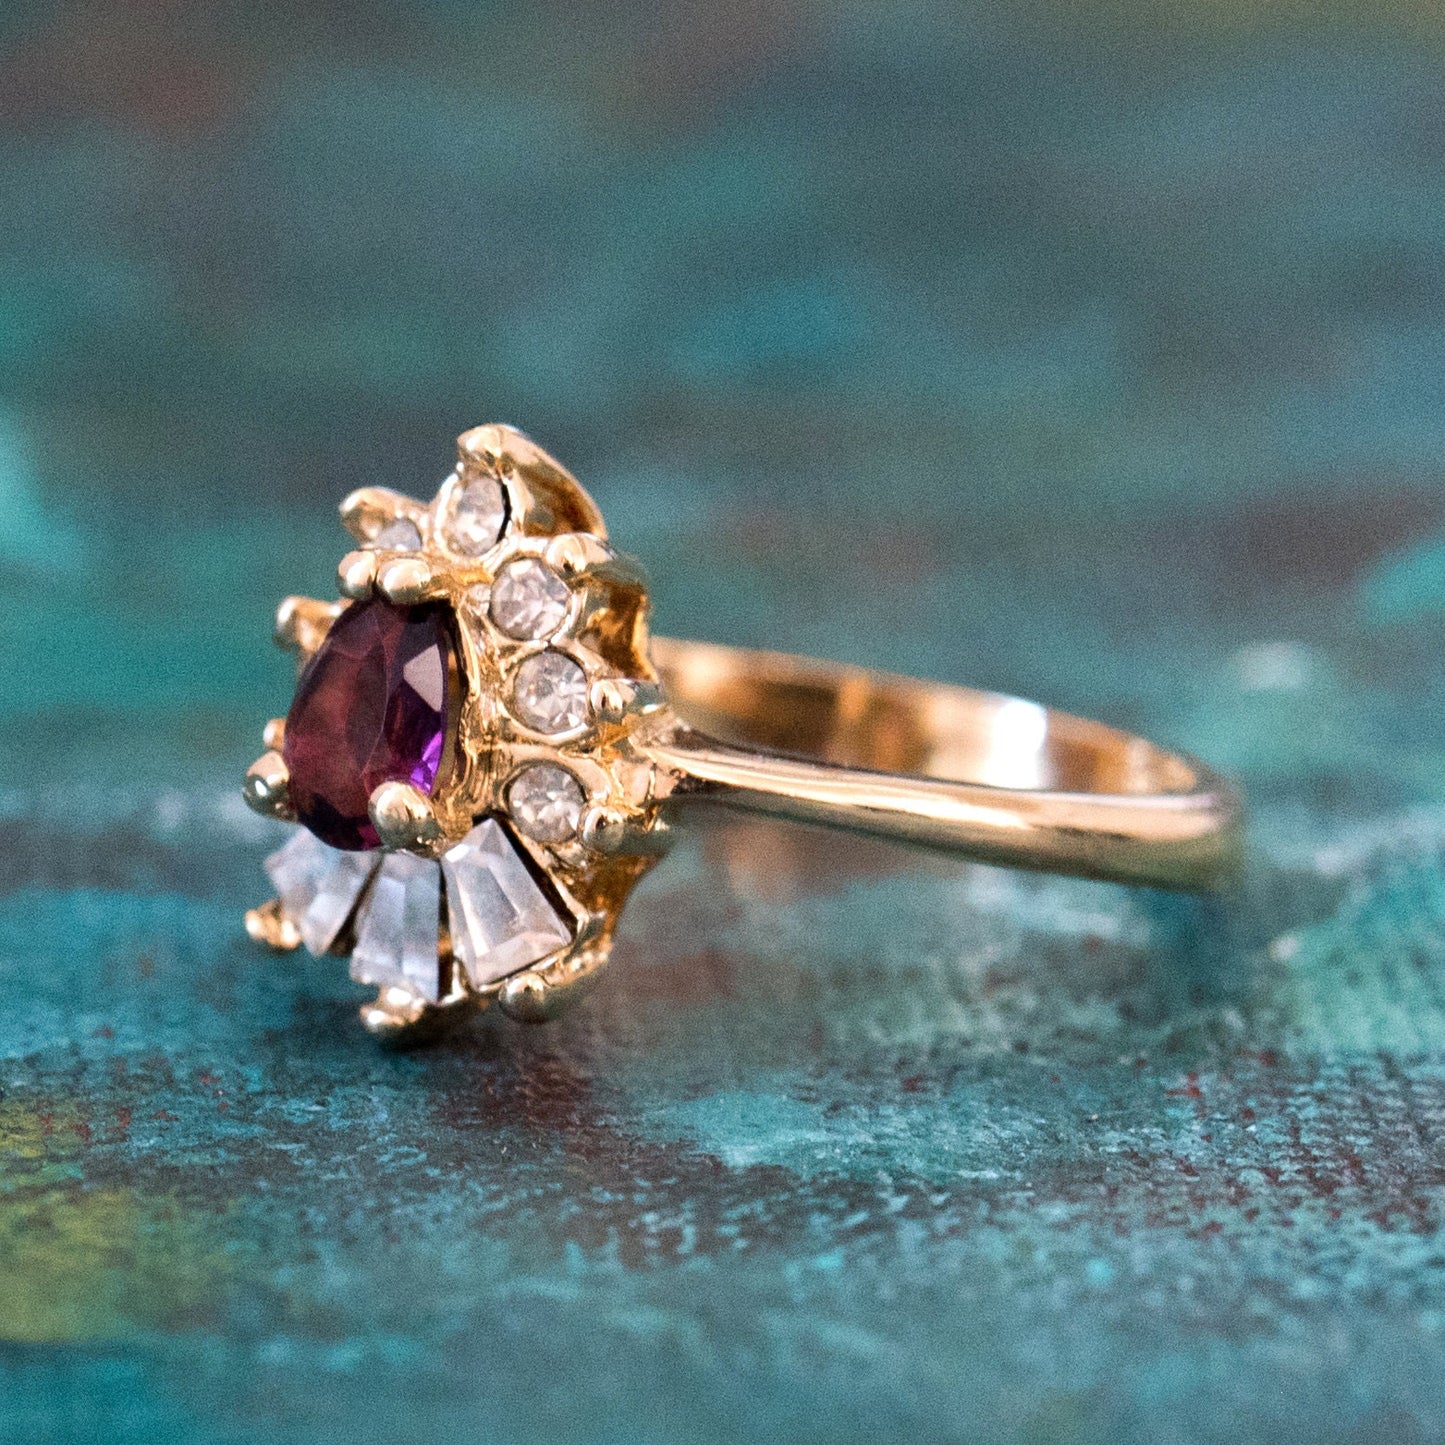 Vintage Ring 1990's Amethyst and Clear Swarovski Crystals 18k Gold Plated Ring Antique Womans Engagement R3093 - Limited Stock - Never Worn